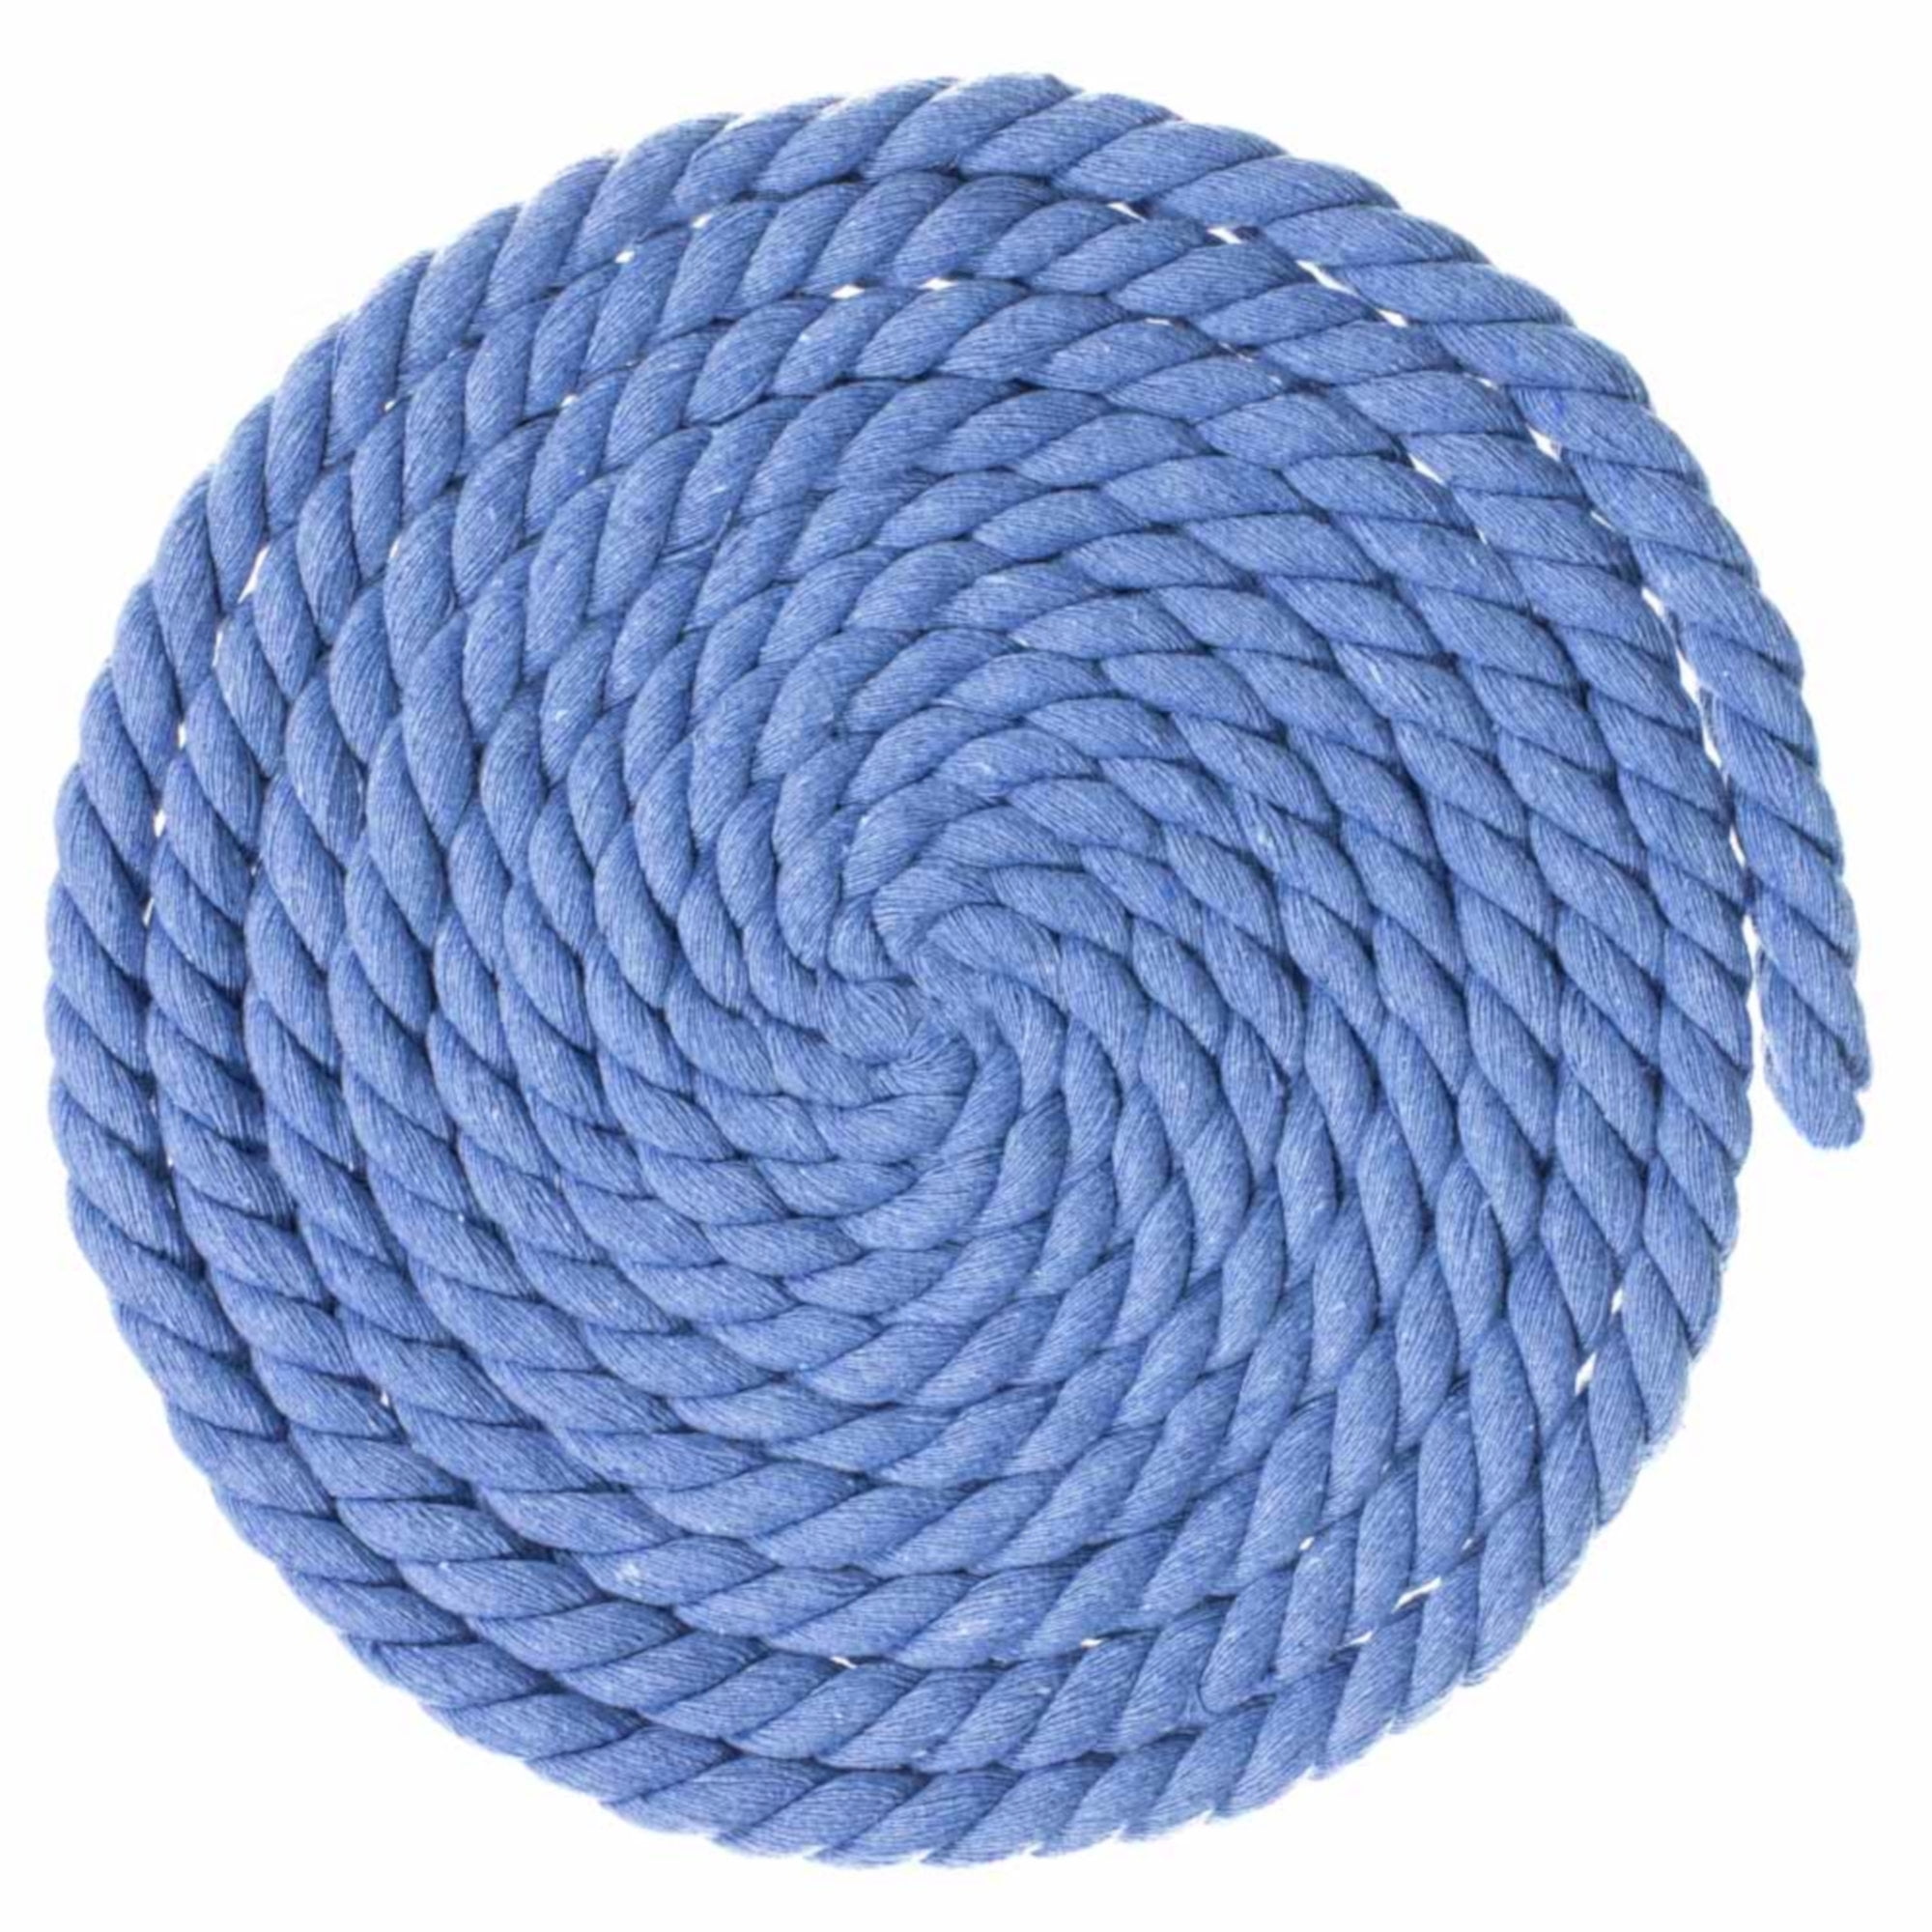 Super Soft 3 Strand Twisted Cotton Rope Teal, 1/4 Inch x 10 Feet 